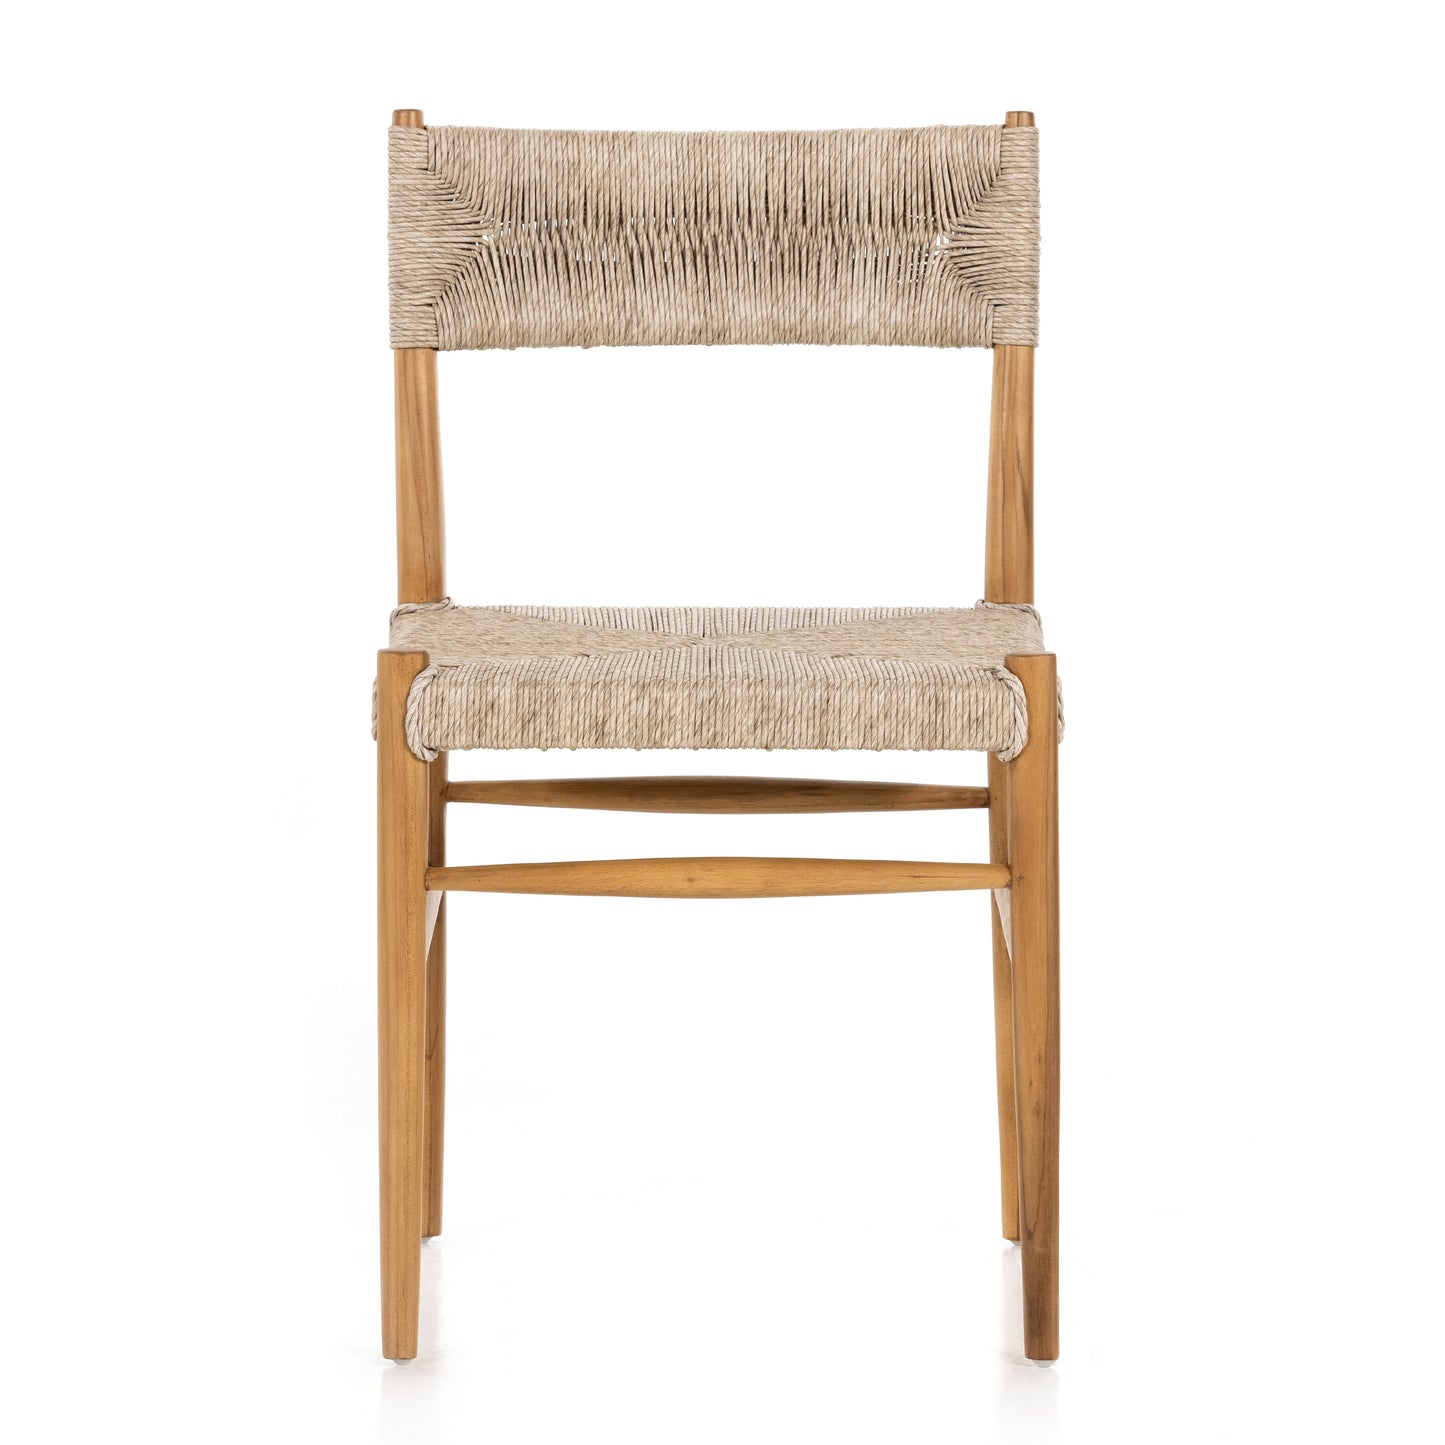 Lomas Outdoor Dining Chair Outdoor Chairs Four Hands     Four Hands, Mid Century Modern Furniture, Old Bones Furniture Company, Old Bones Co, Modern Mid Century, Designer Furniture, https://www.oldbonesco.com/